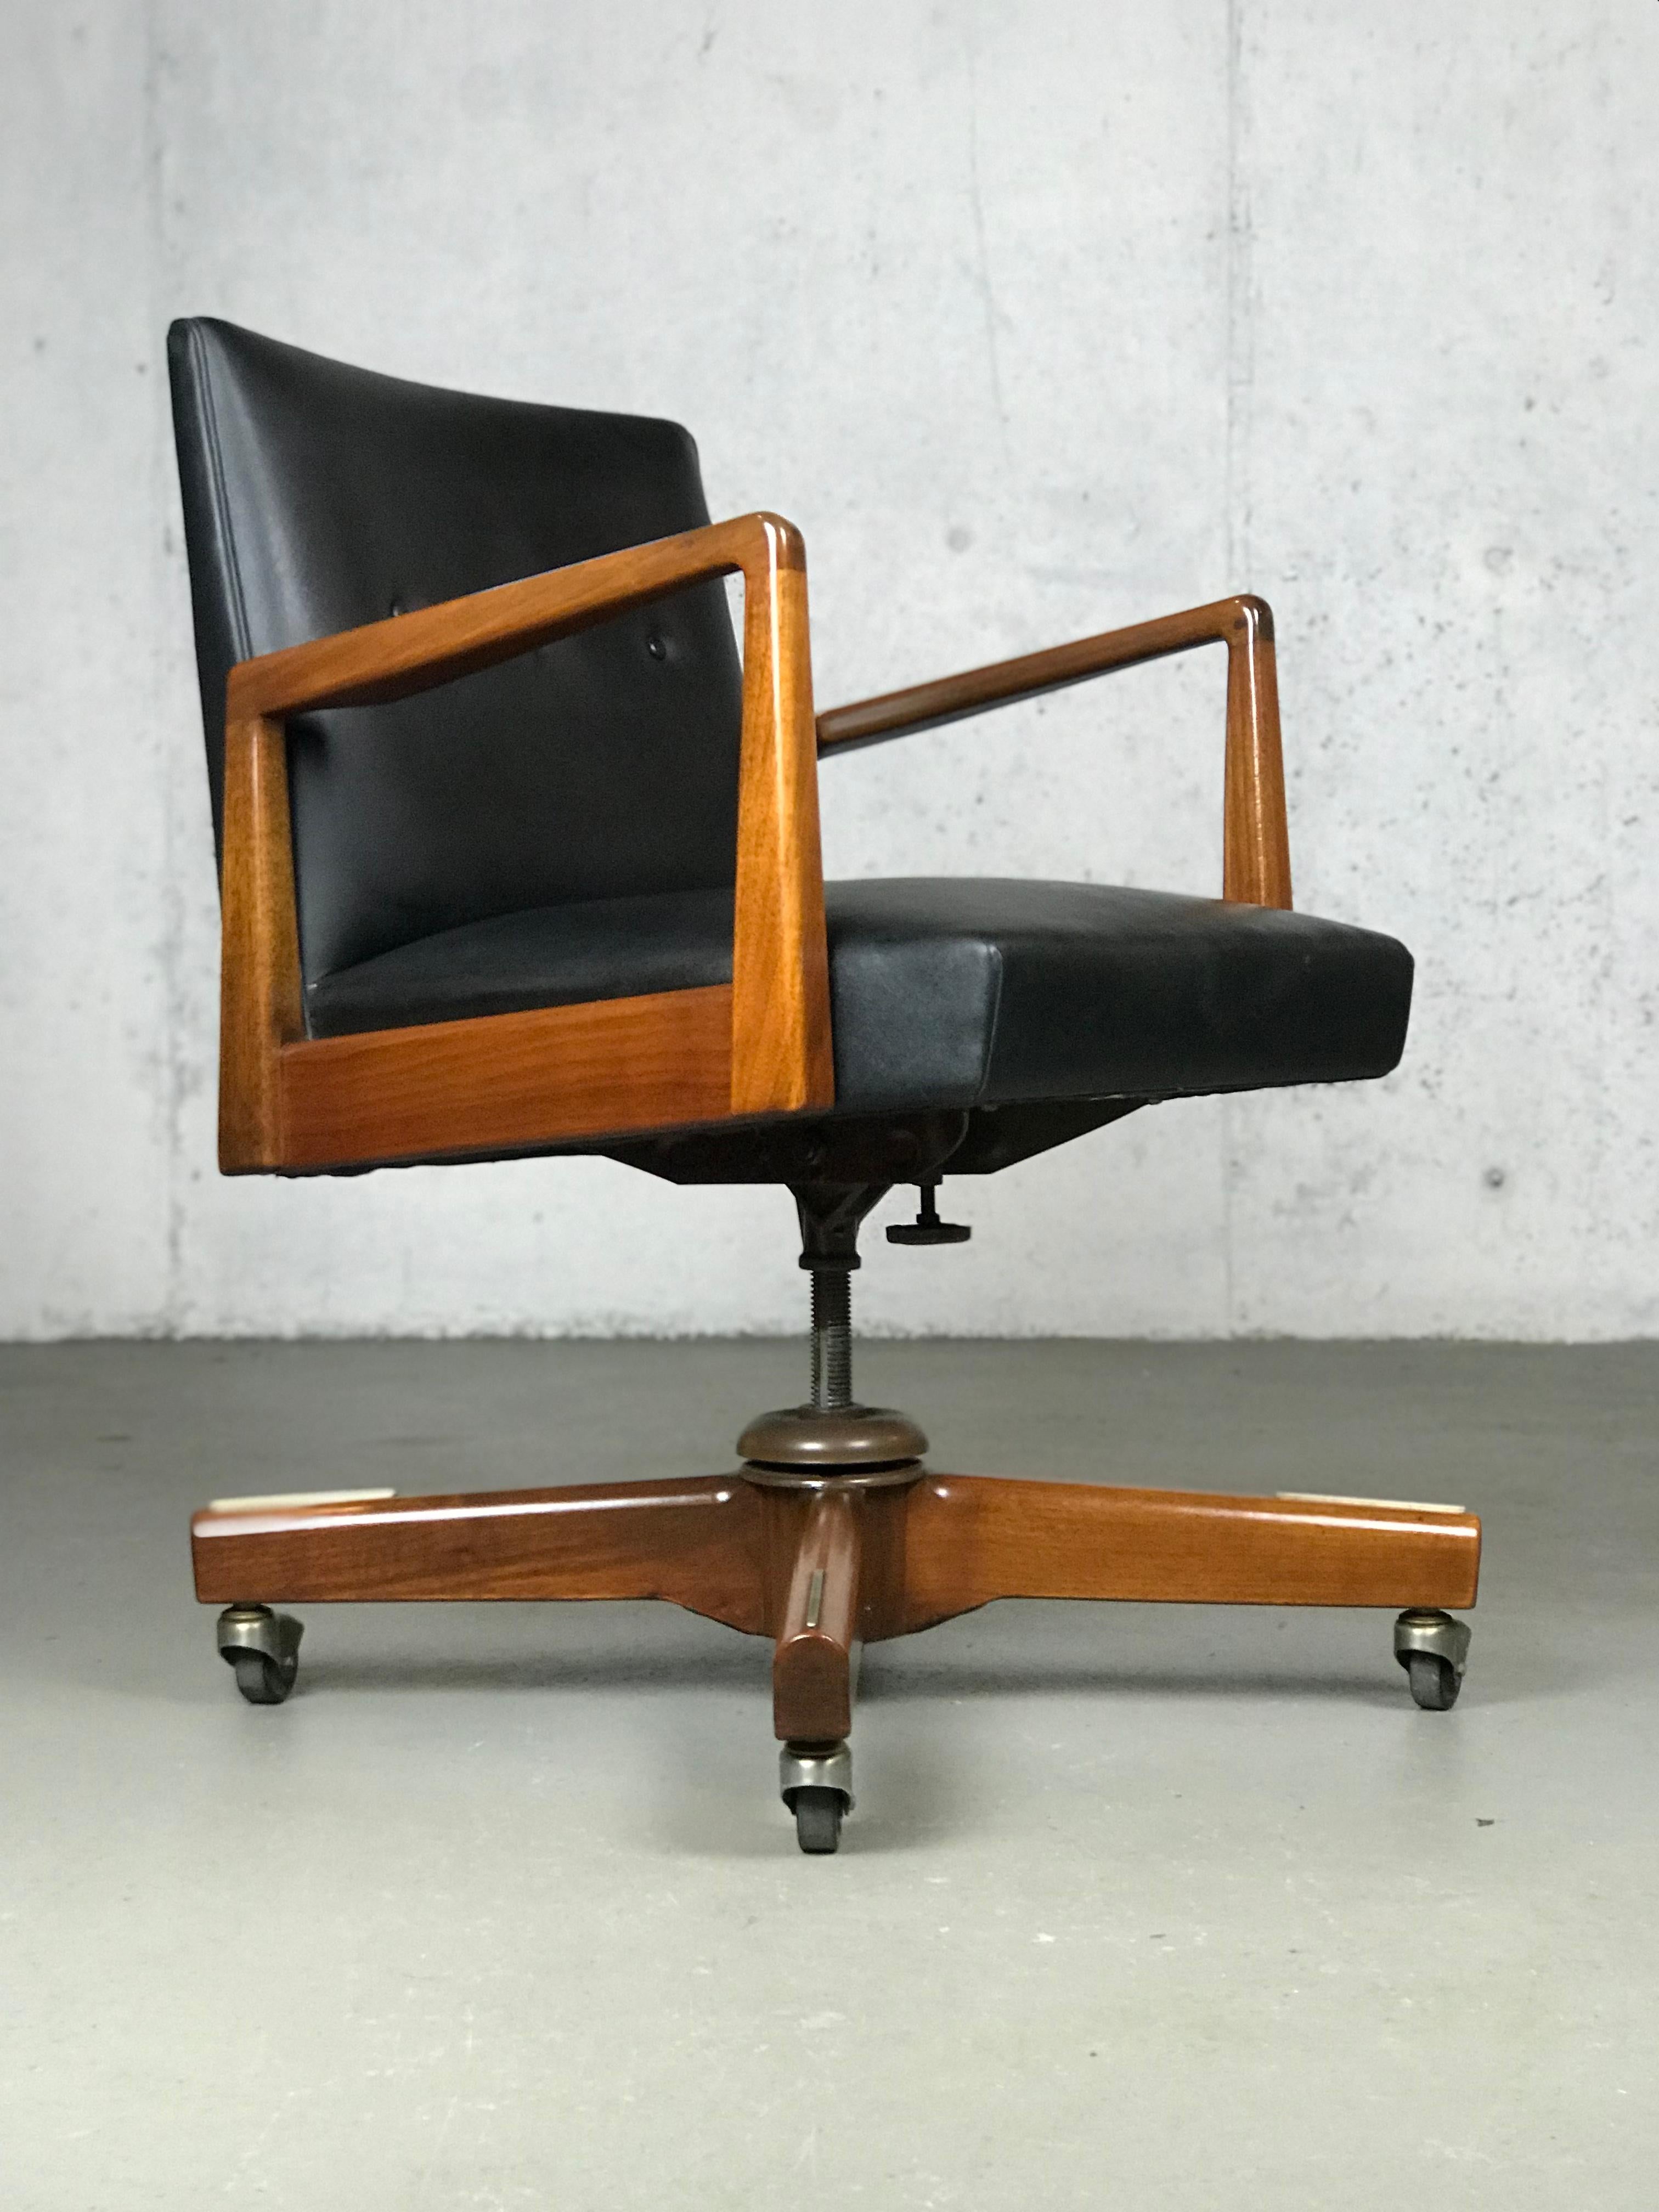 Nice original Jens Risom executive office chair. Walnut has its original finish. Nice detail with the aluminum footrests on the legs and the arm cut-outs by the seat back. Minor wear on legs. A small spot of wear or loss to the vinyl on top back